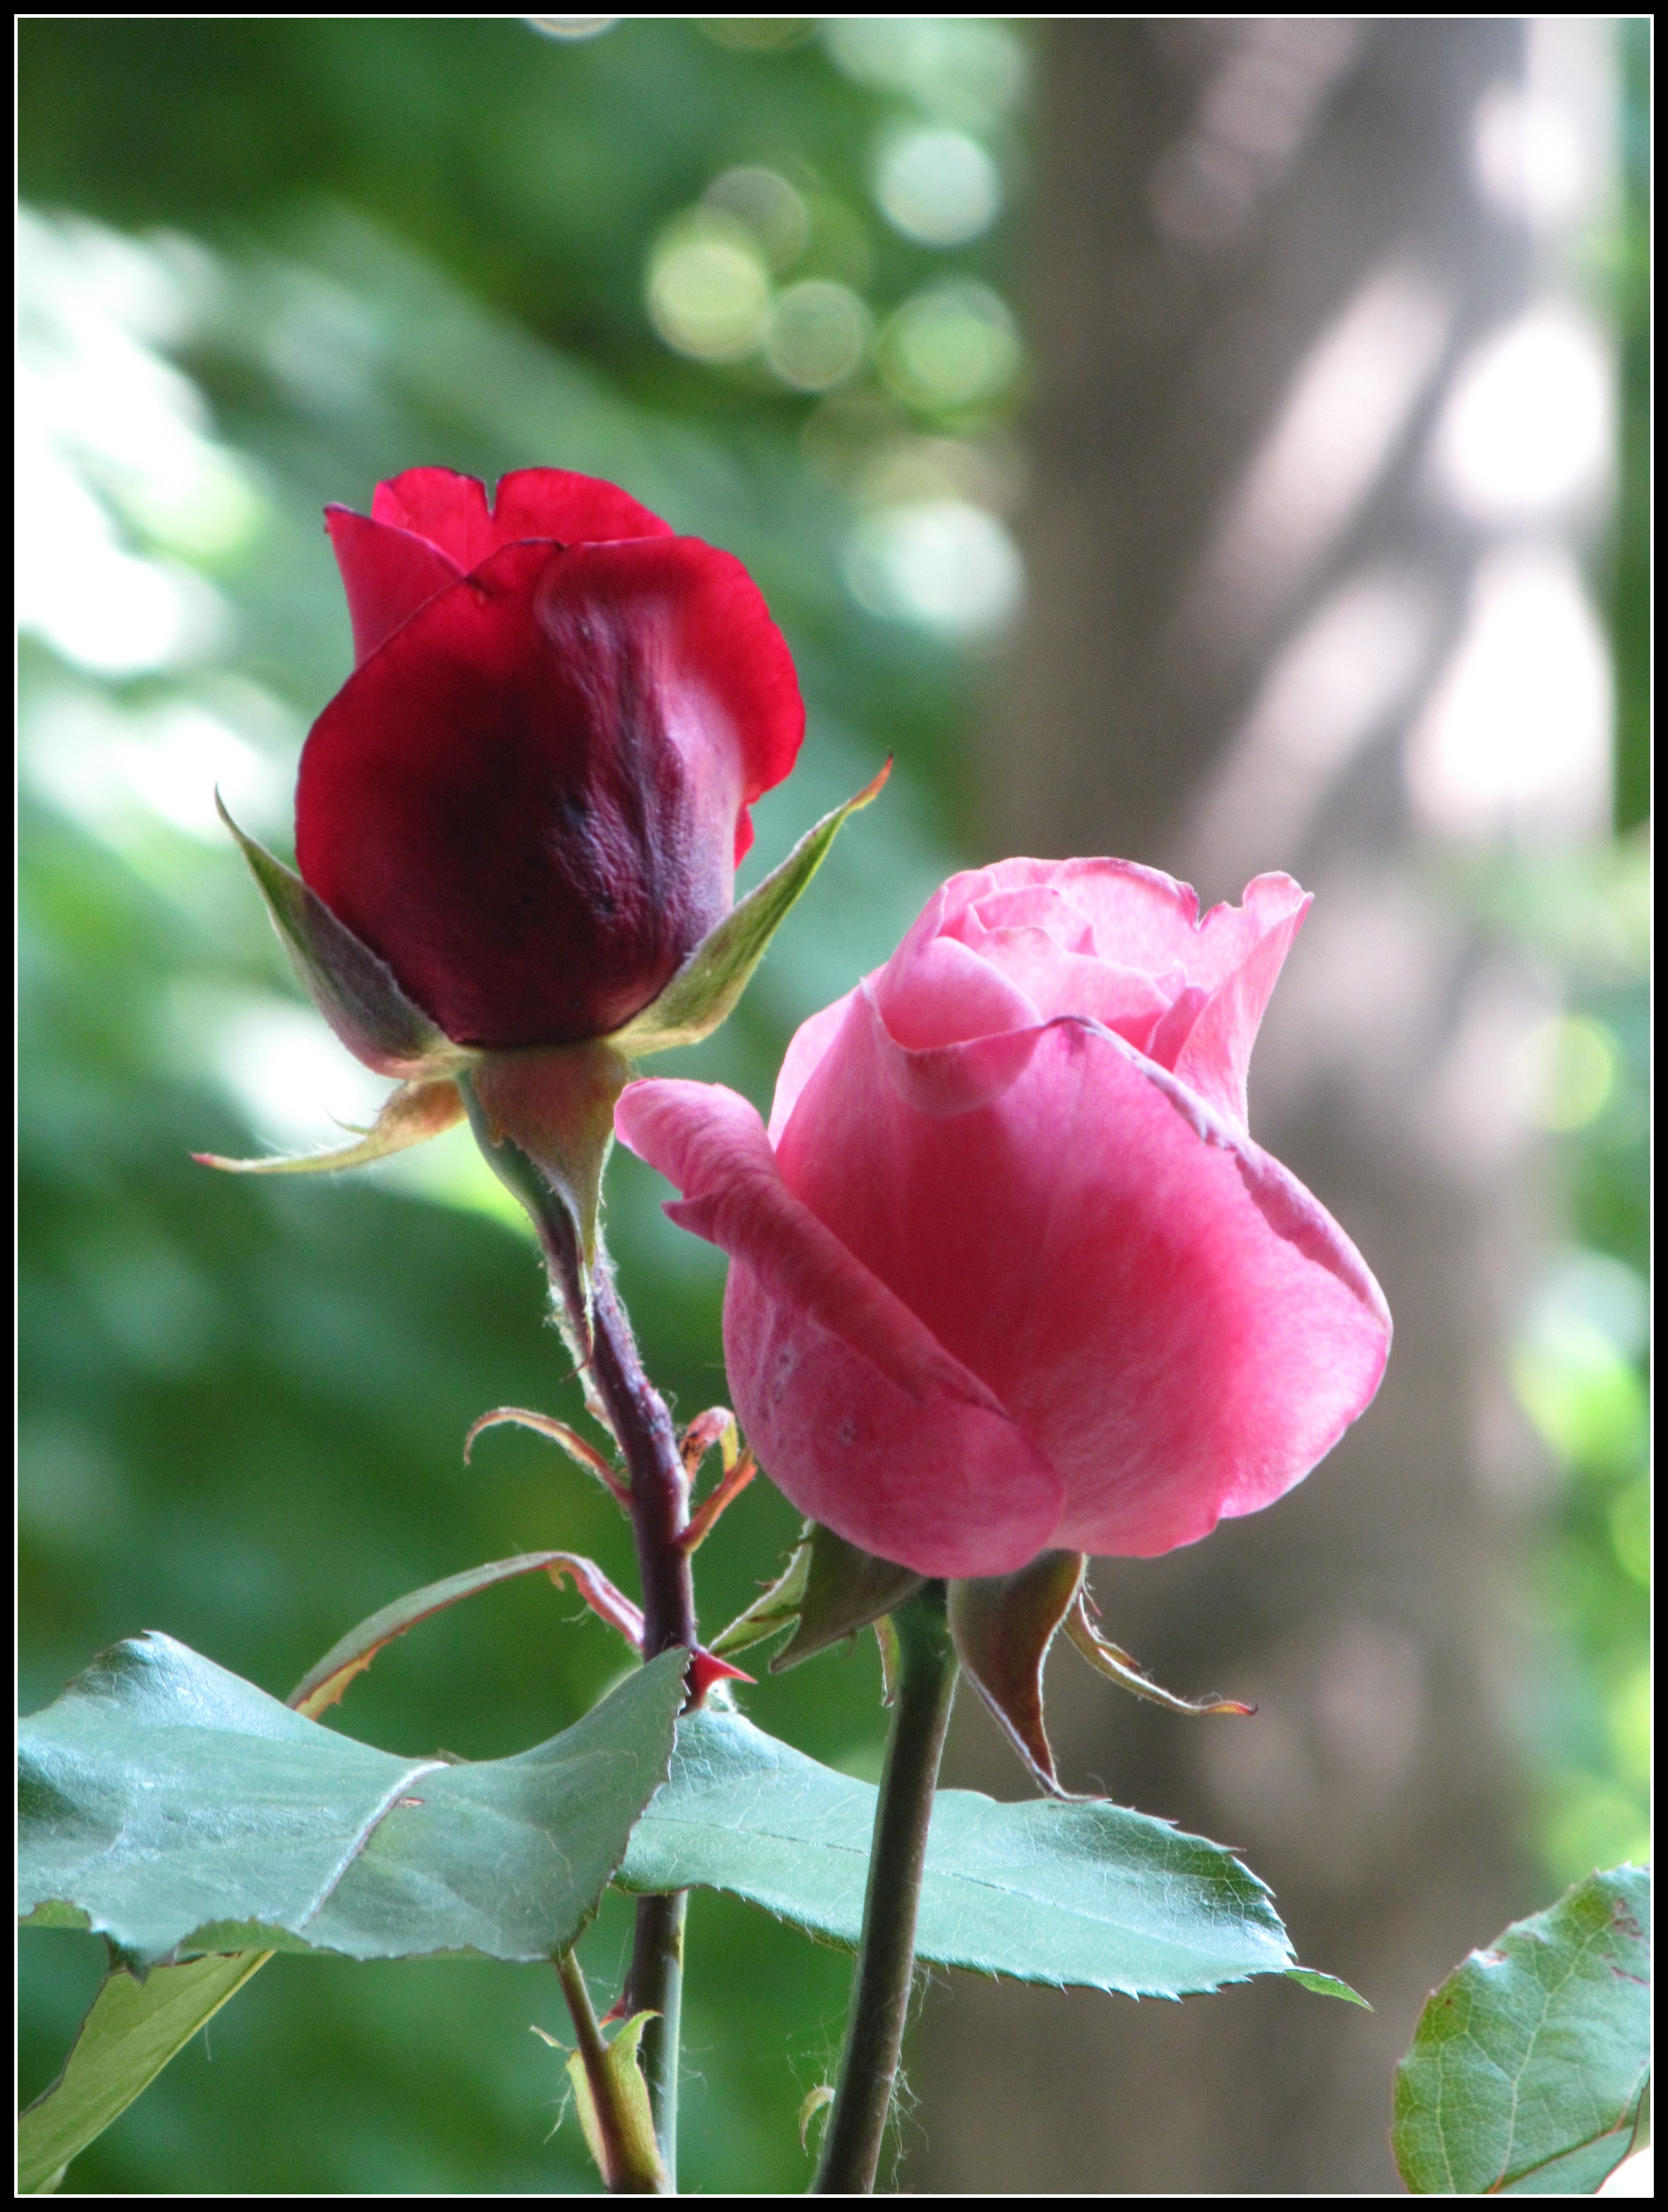 pink and red rose (2) by hugitsa on DeviantArt